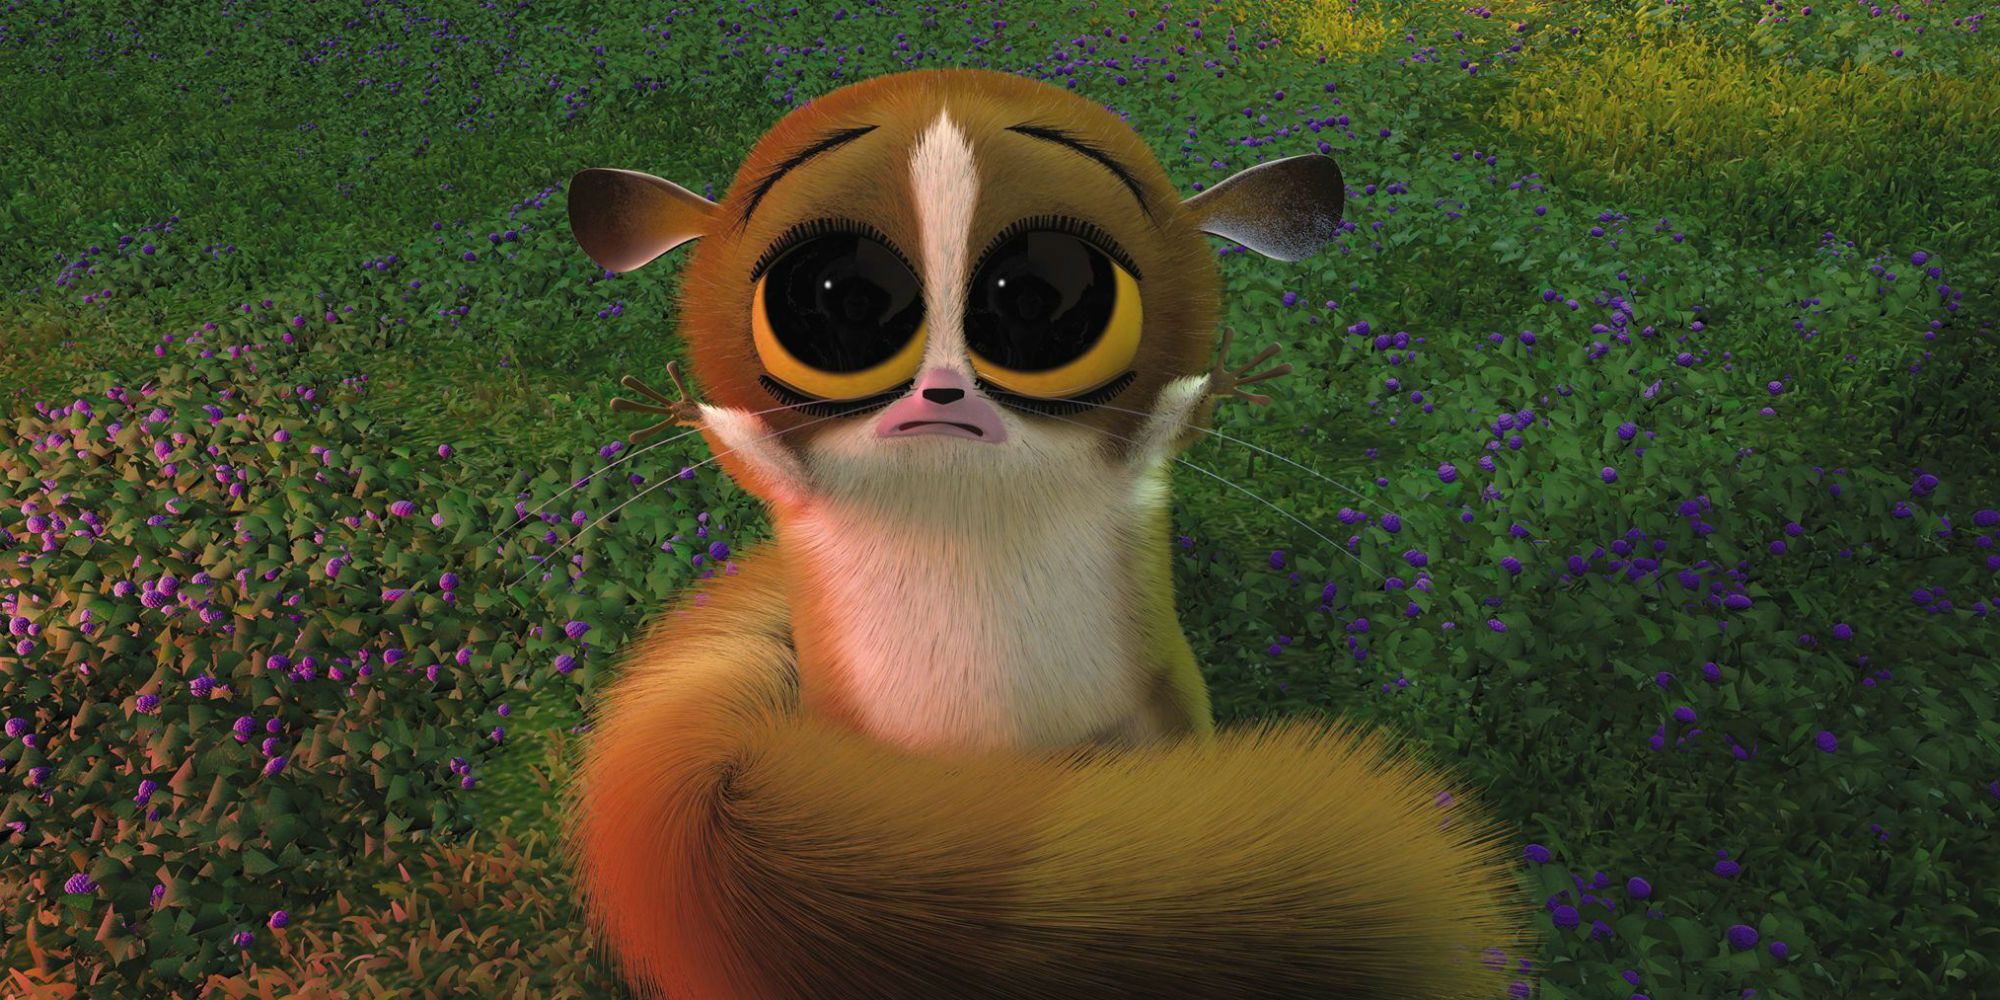 a lemur in the children movie Madagascar - part of the AhaSlides guess the animal quiz